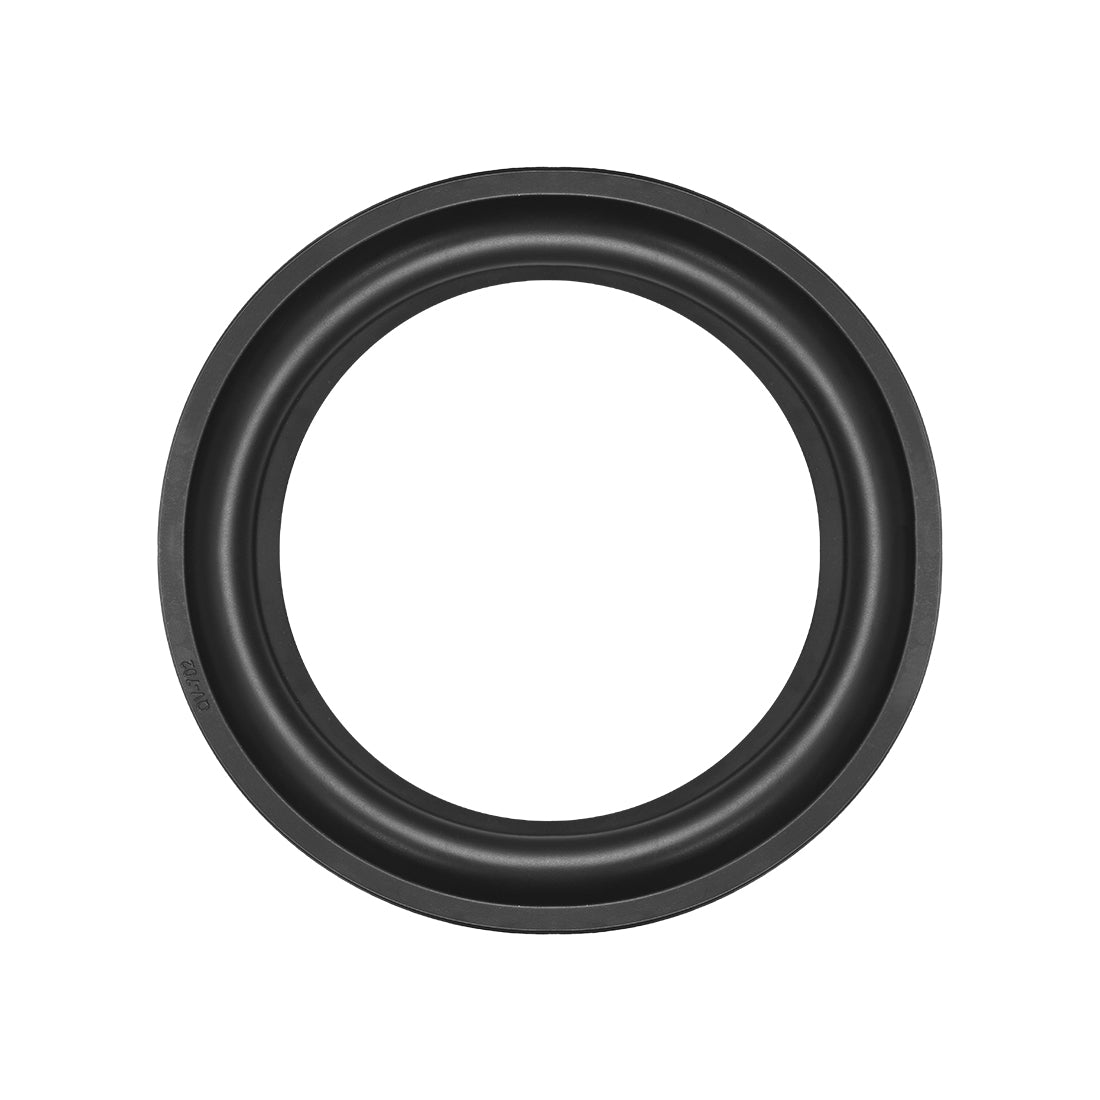 uxcell Uxcell 7" 7inch Rubber Edge Surround Rings Replacement Part for Repair or DIY